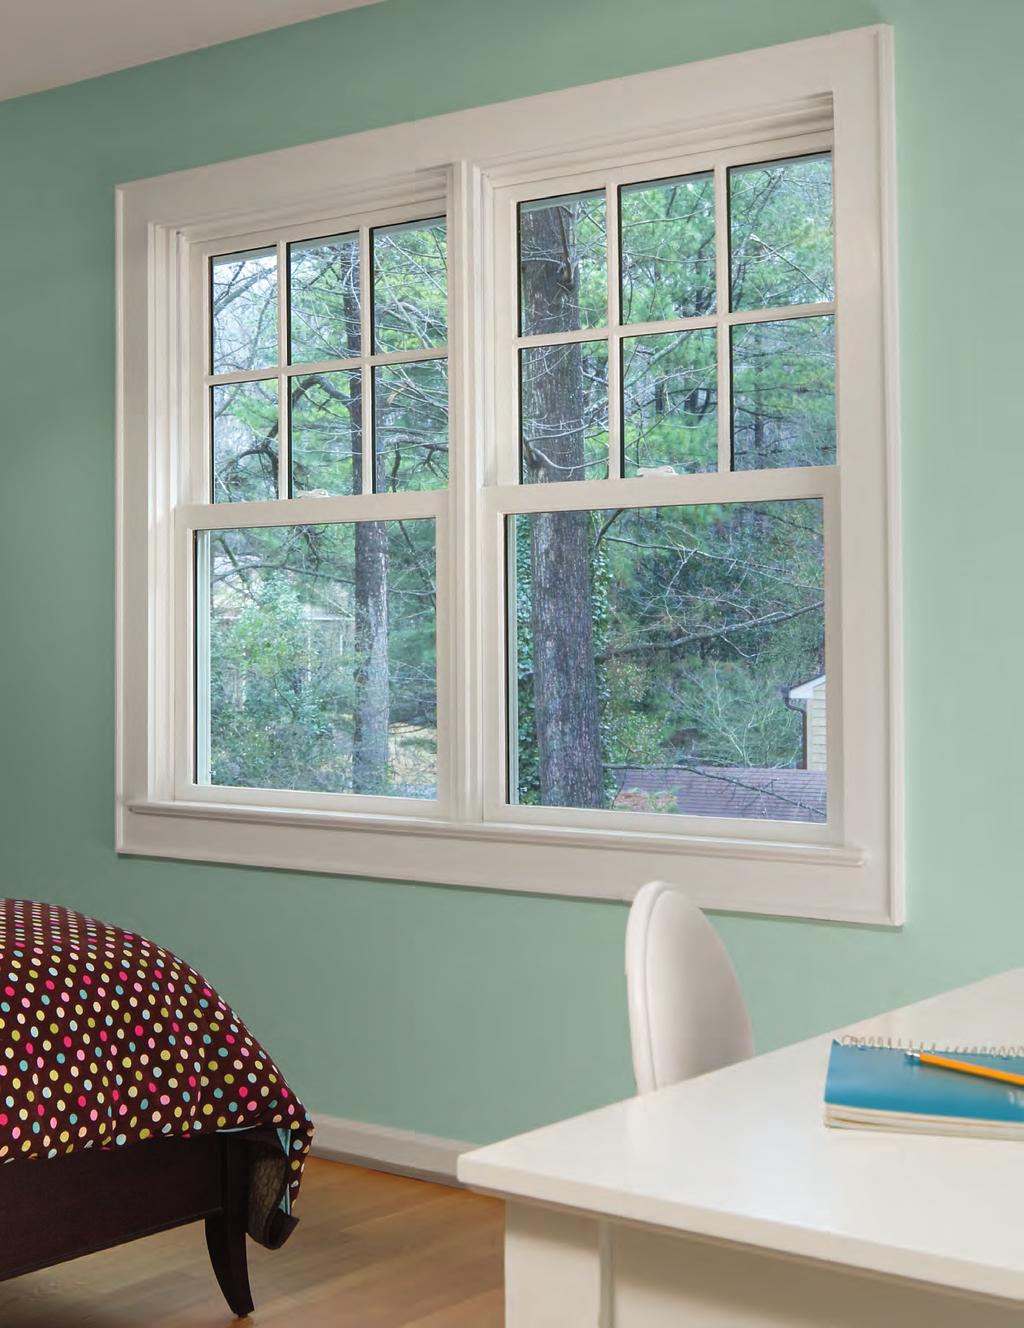 Marvin Windows and Doors Ultimate Insert Double Hung Windows fit beautifully into your existing space, and appear